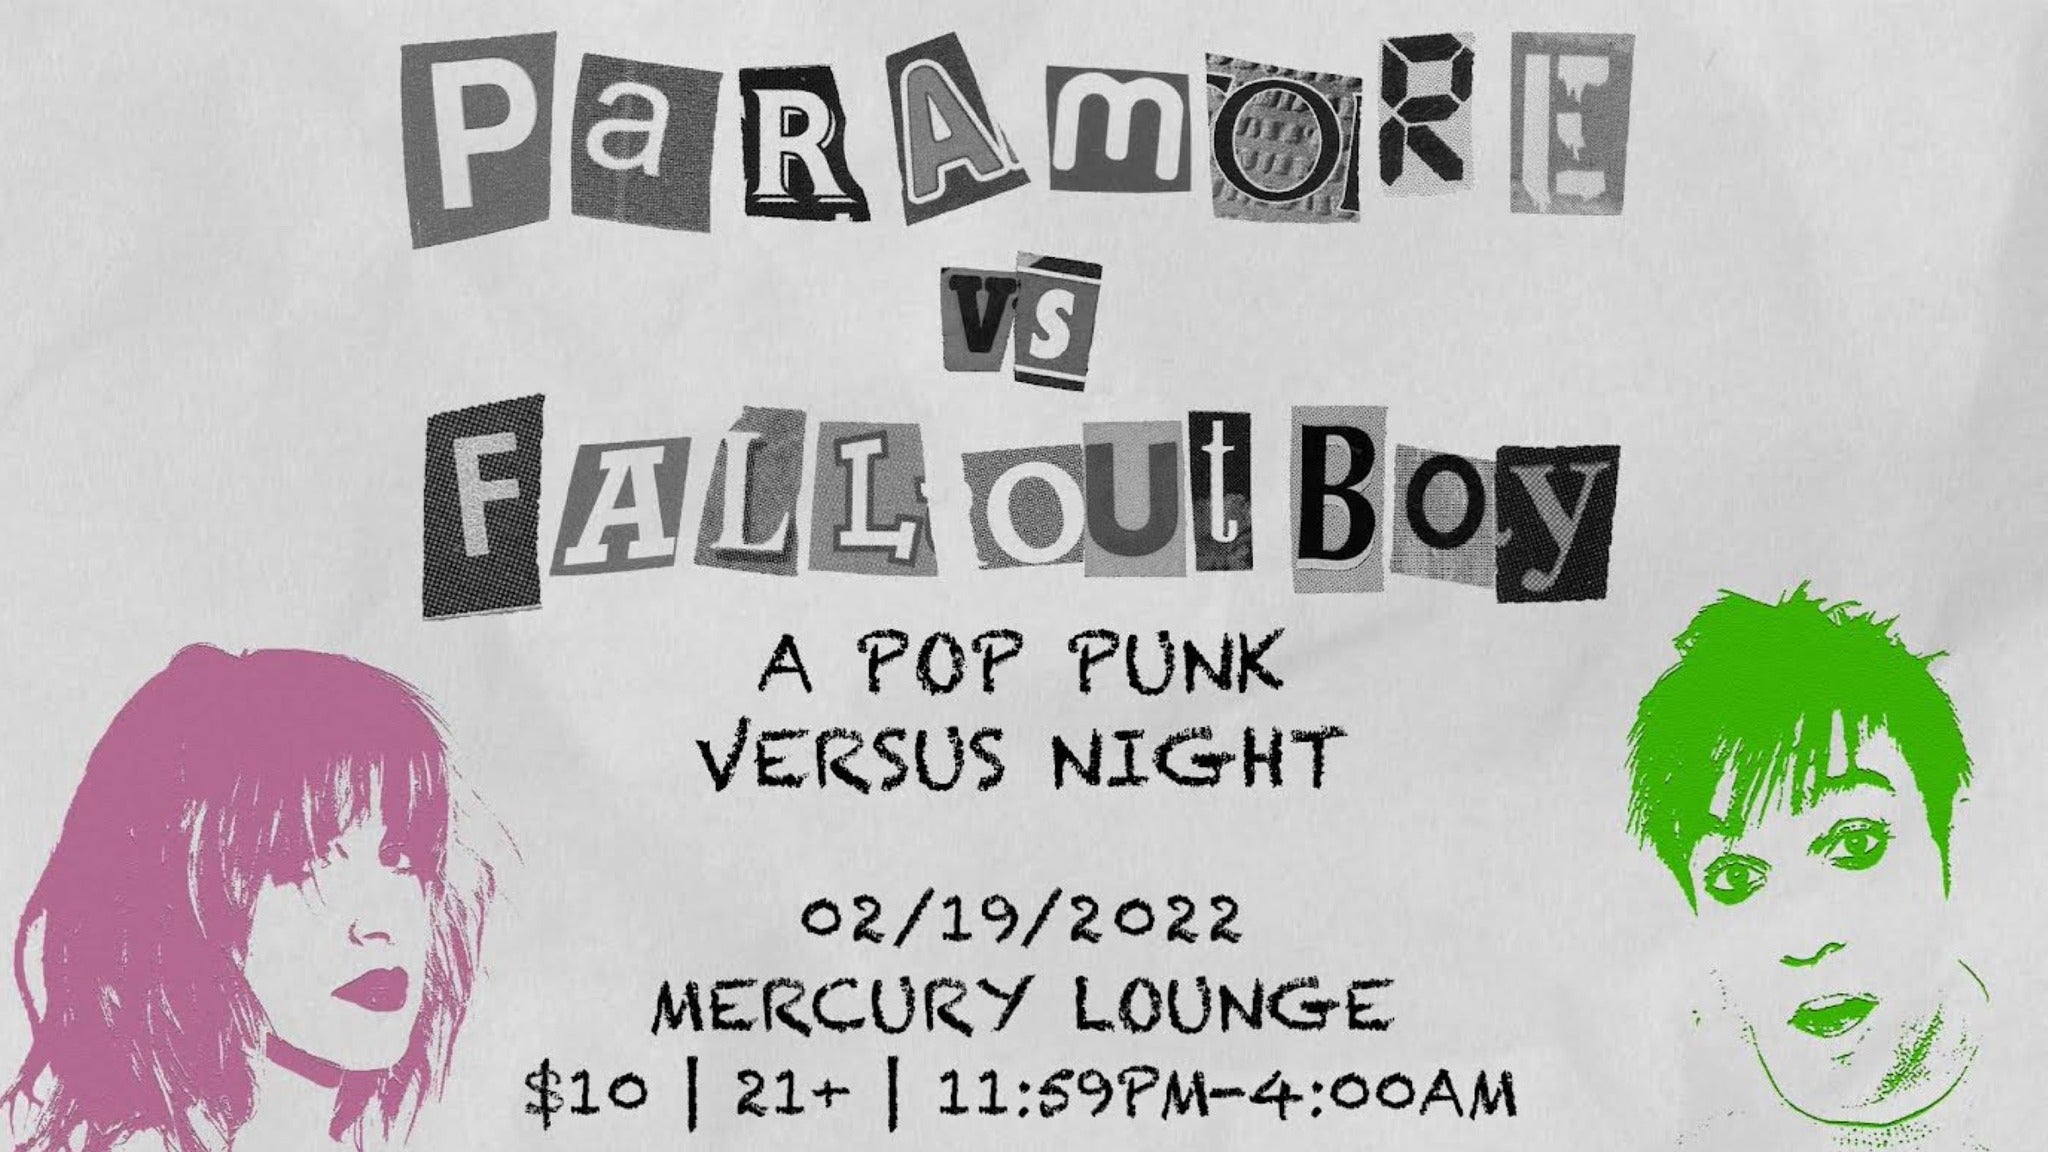 Fall Out Boy vs. Paramore -- A Pop Punk Versus Dance Party in New York promo photo for Citi Cardmember presale offer code